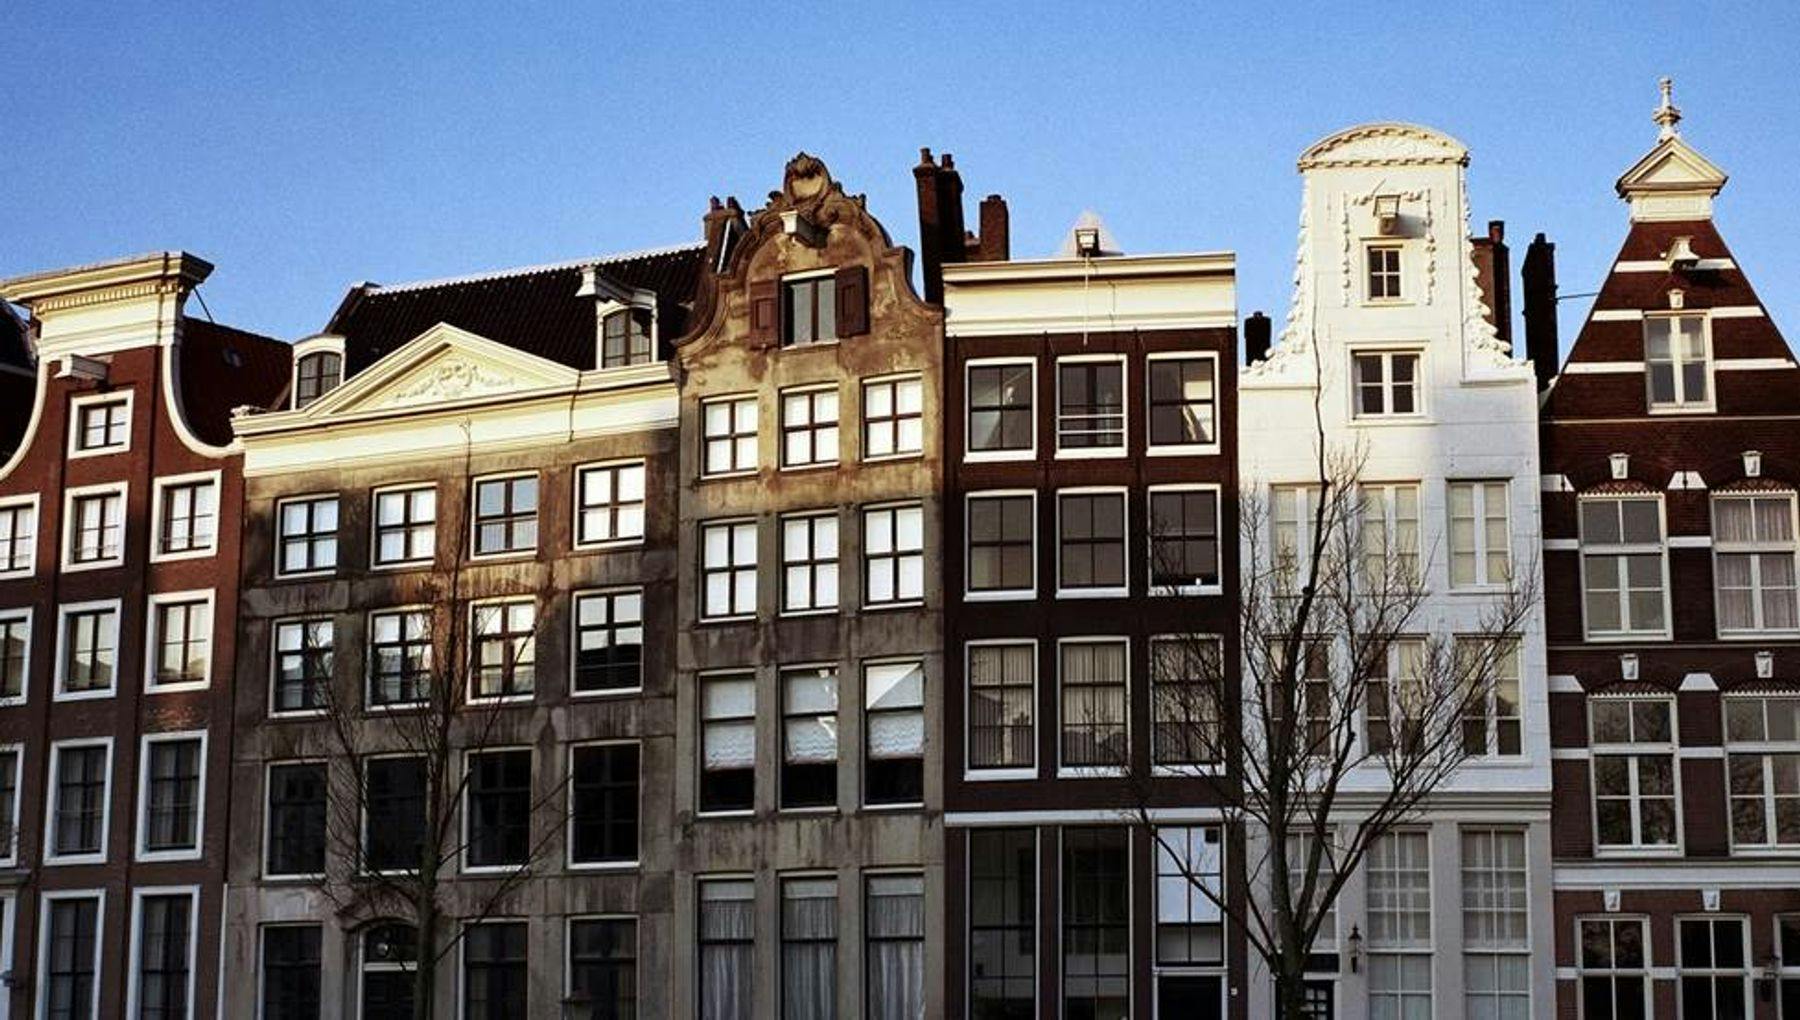 Canal houses on Keizersgracht, Amsterdam